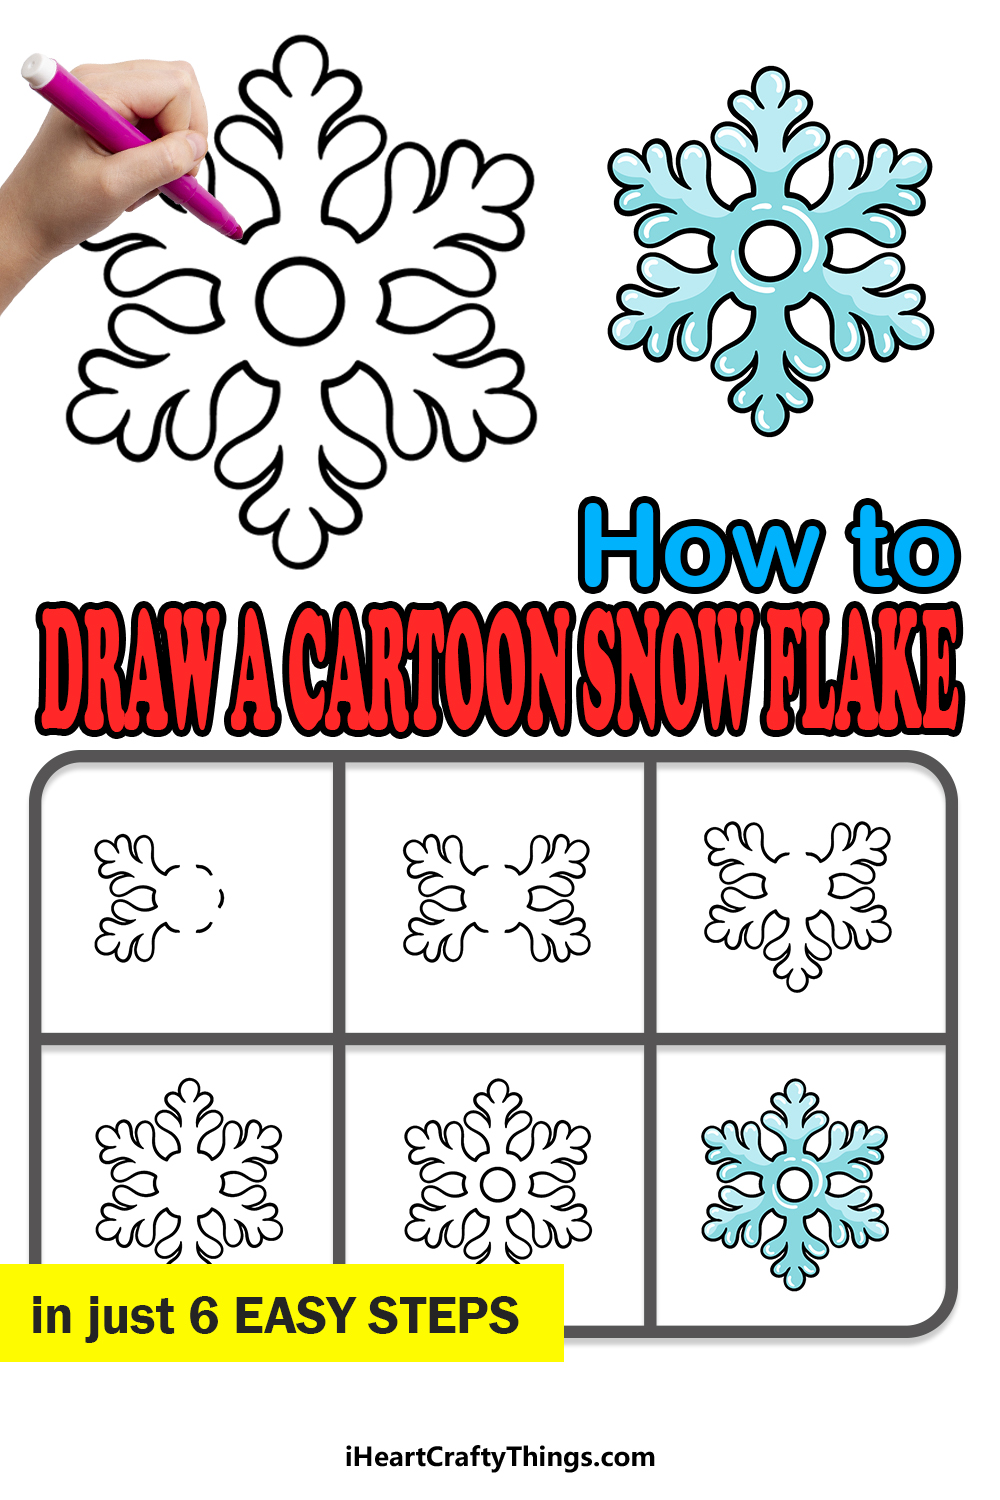 how to draw a cartoon snowflake in 6 easy steps